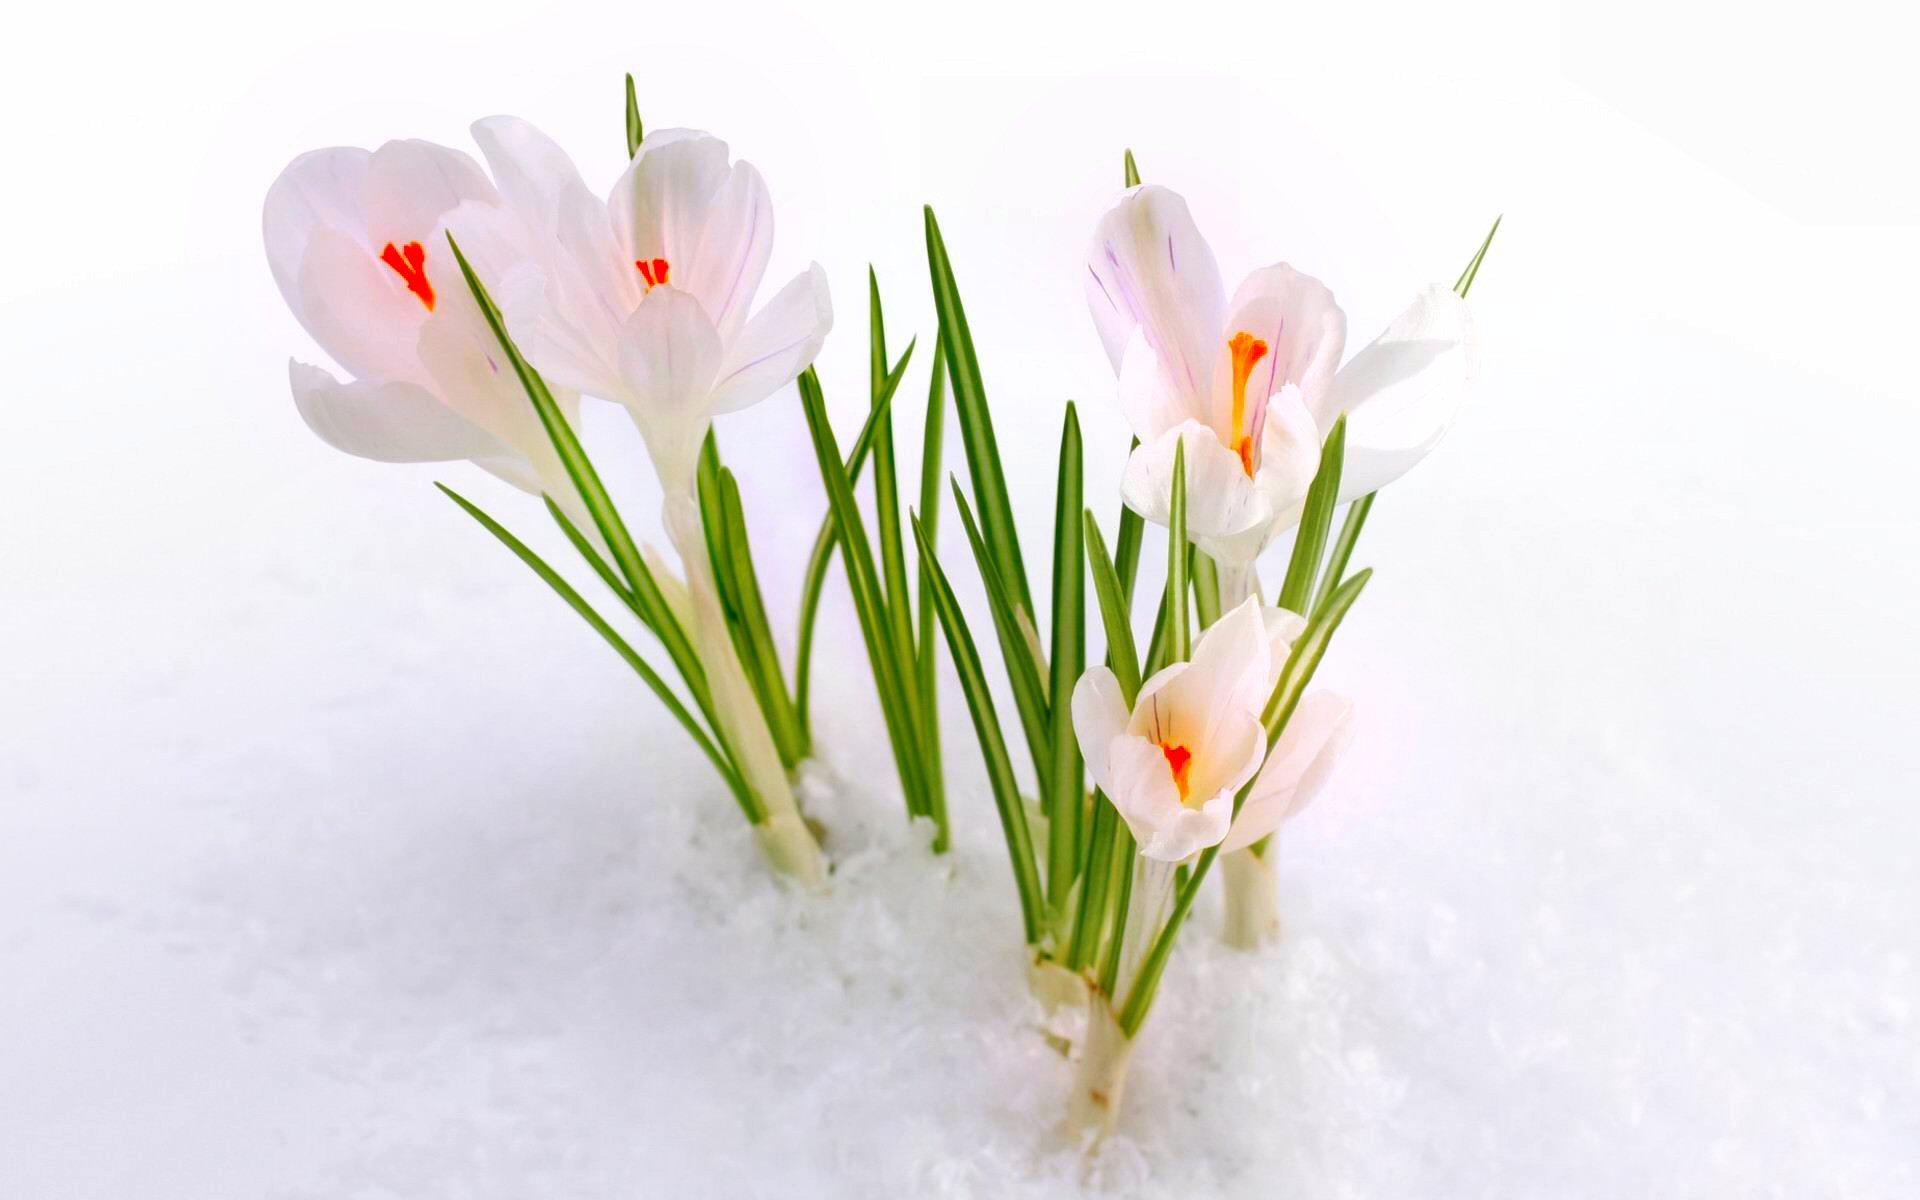  Crocus HD Android Wallpapers